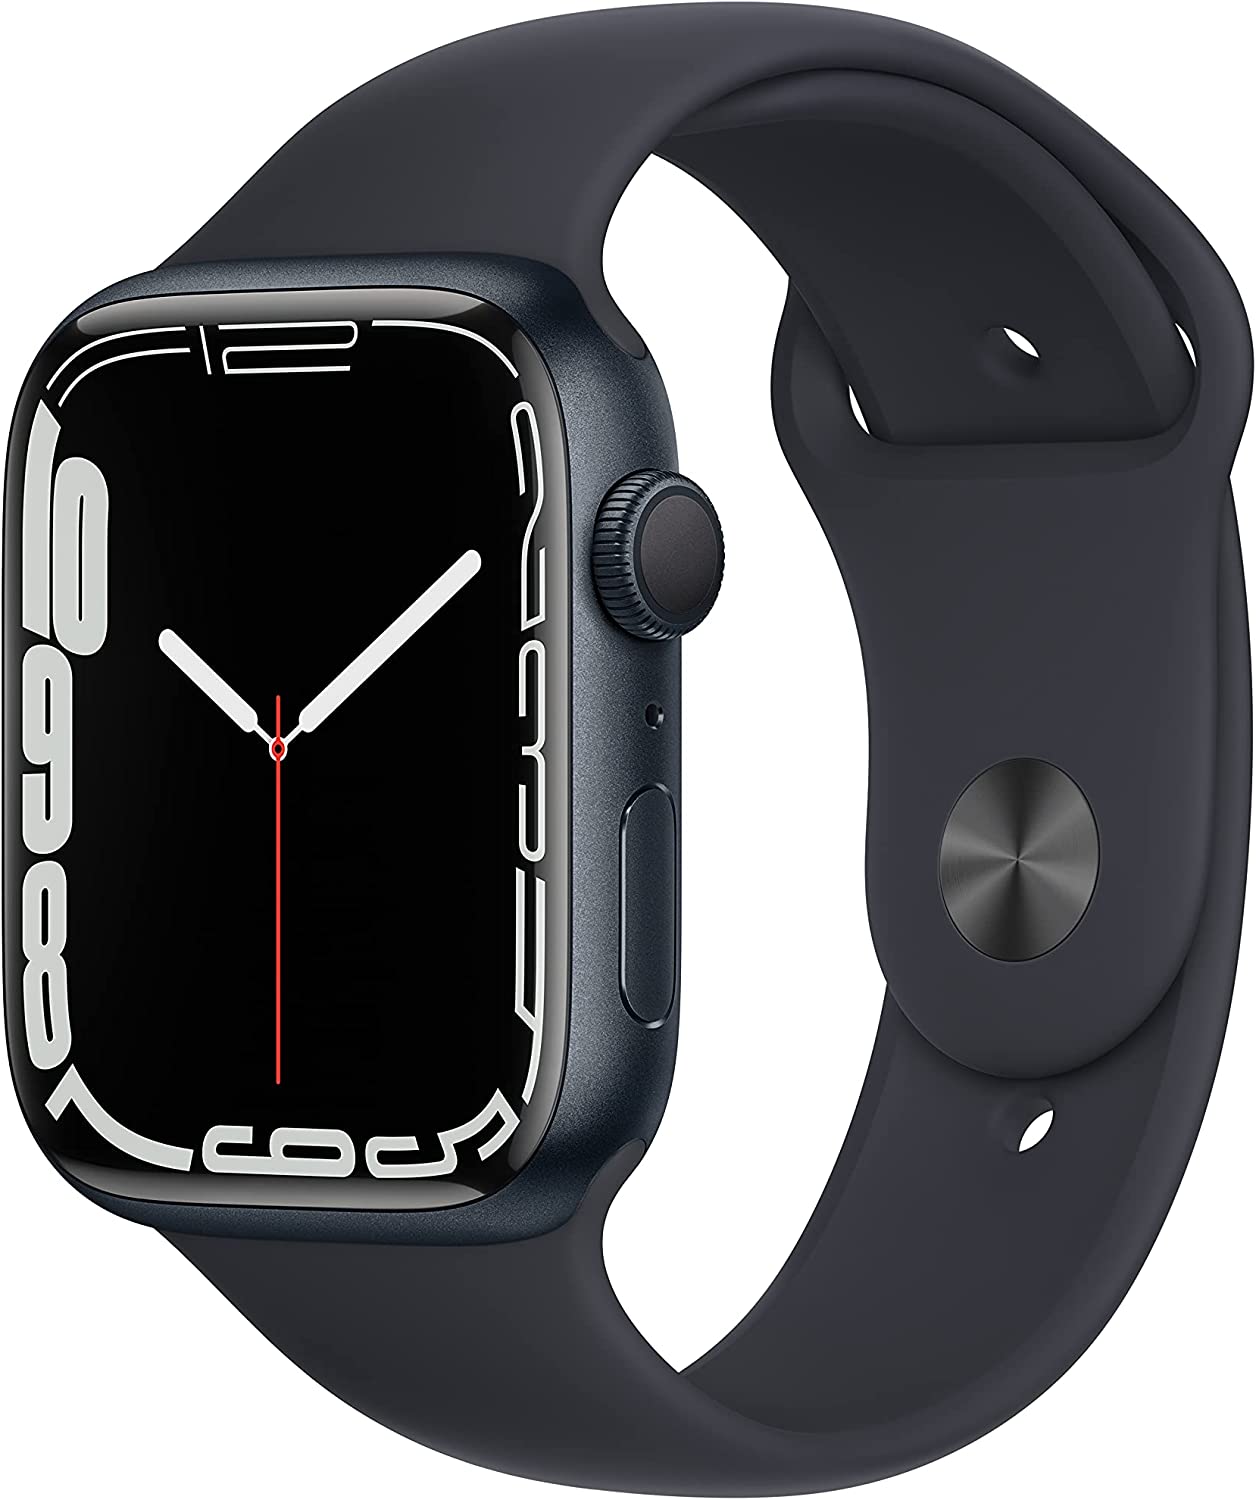 Apple Watch Series 7 Prime Day Deal!